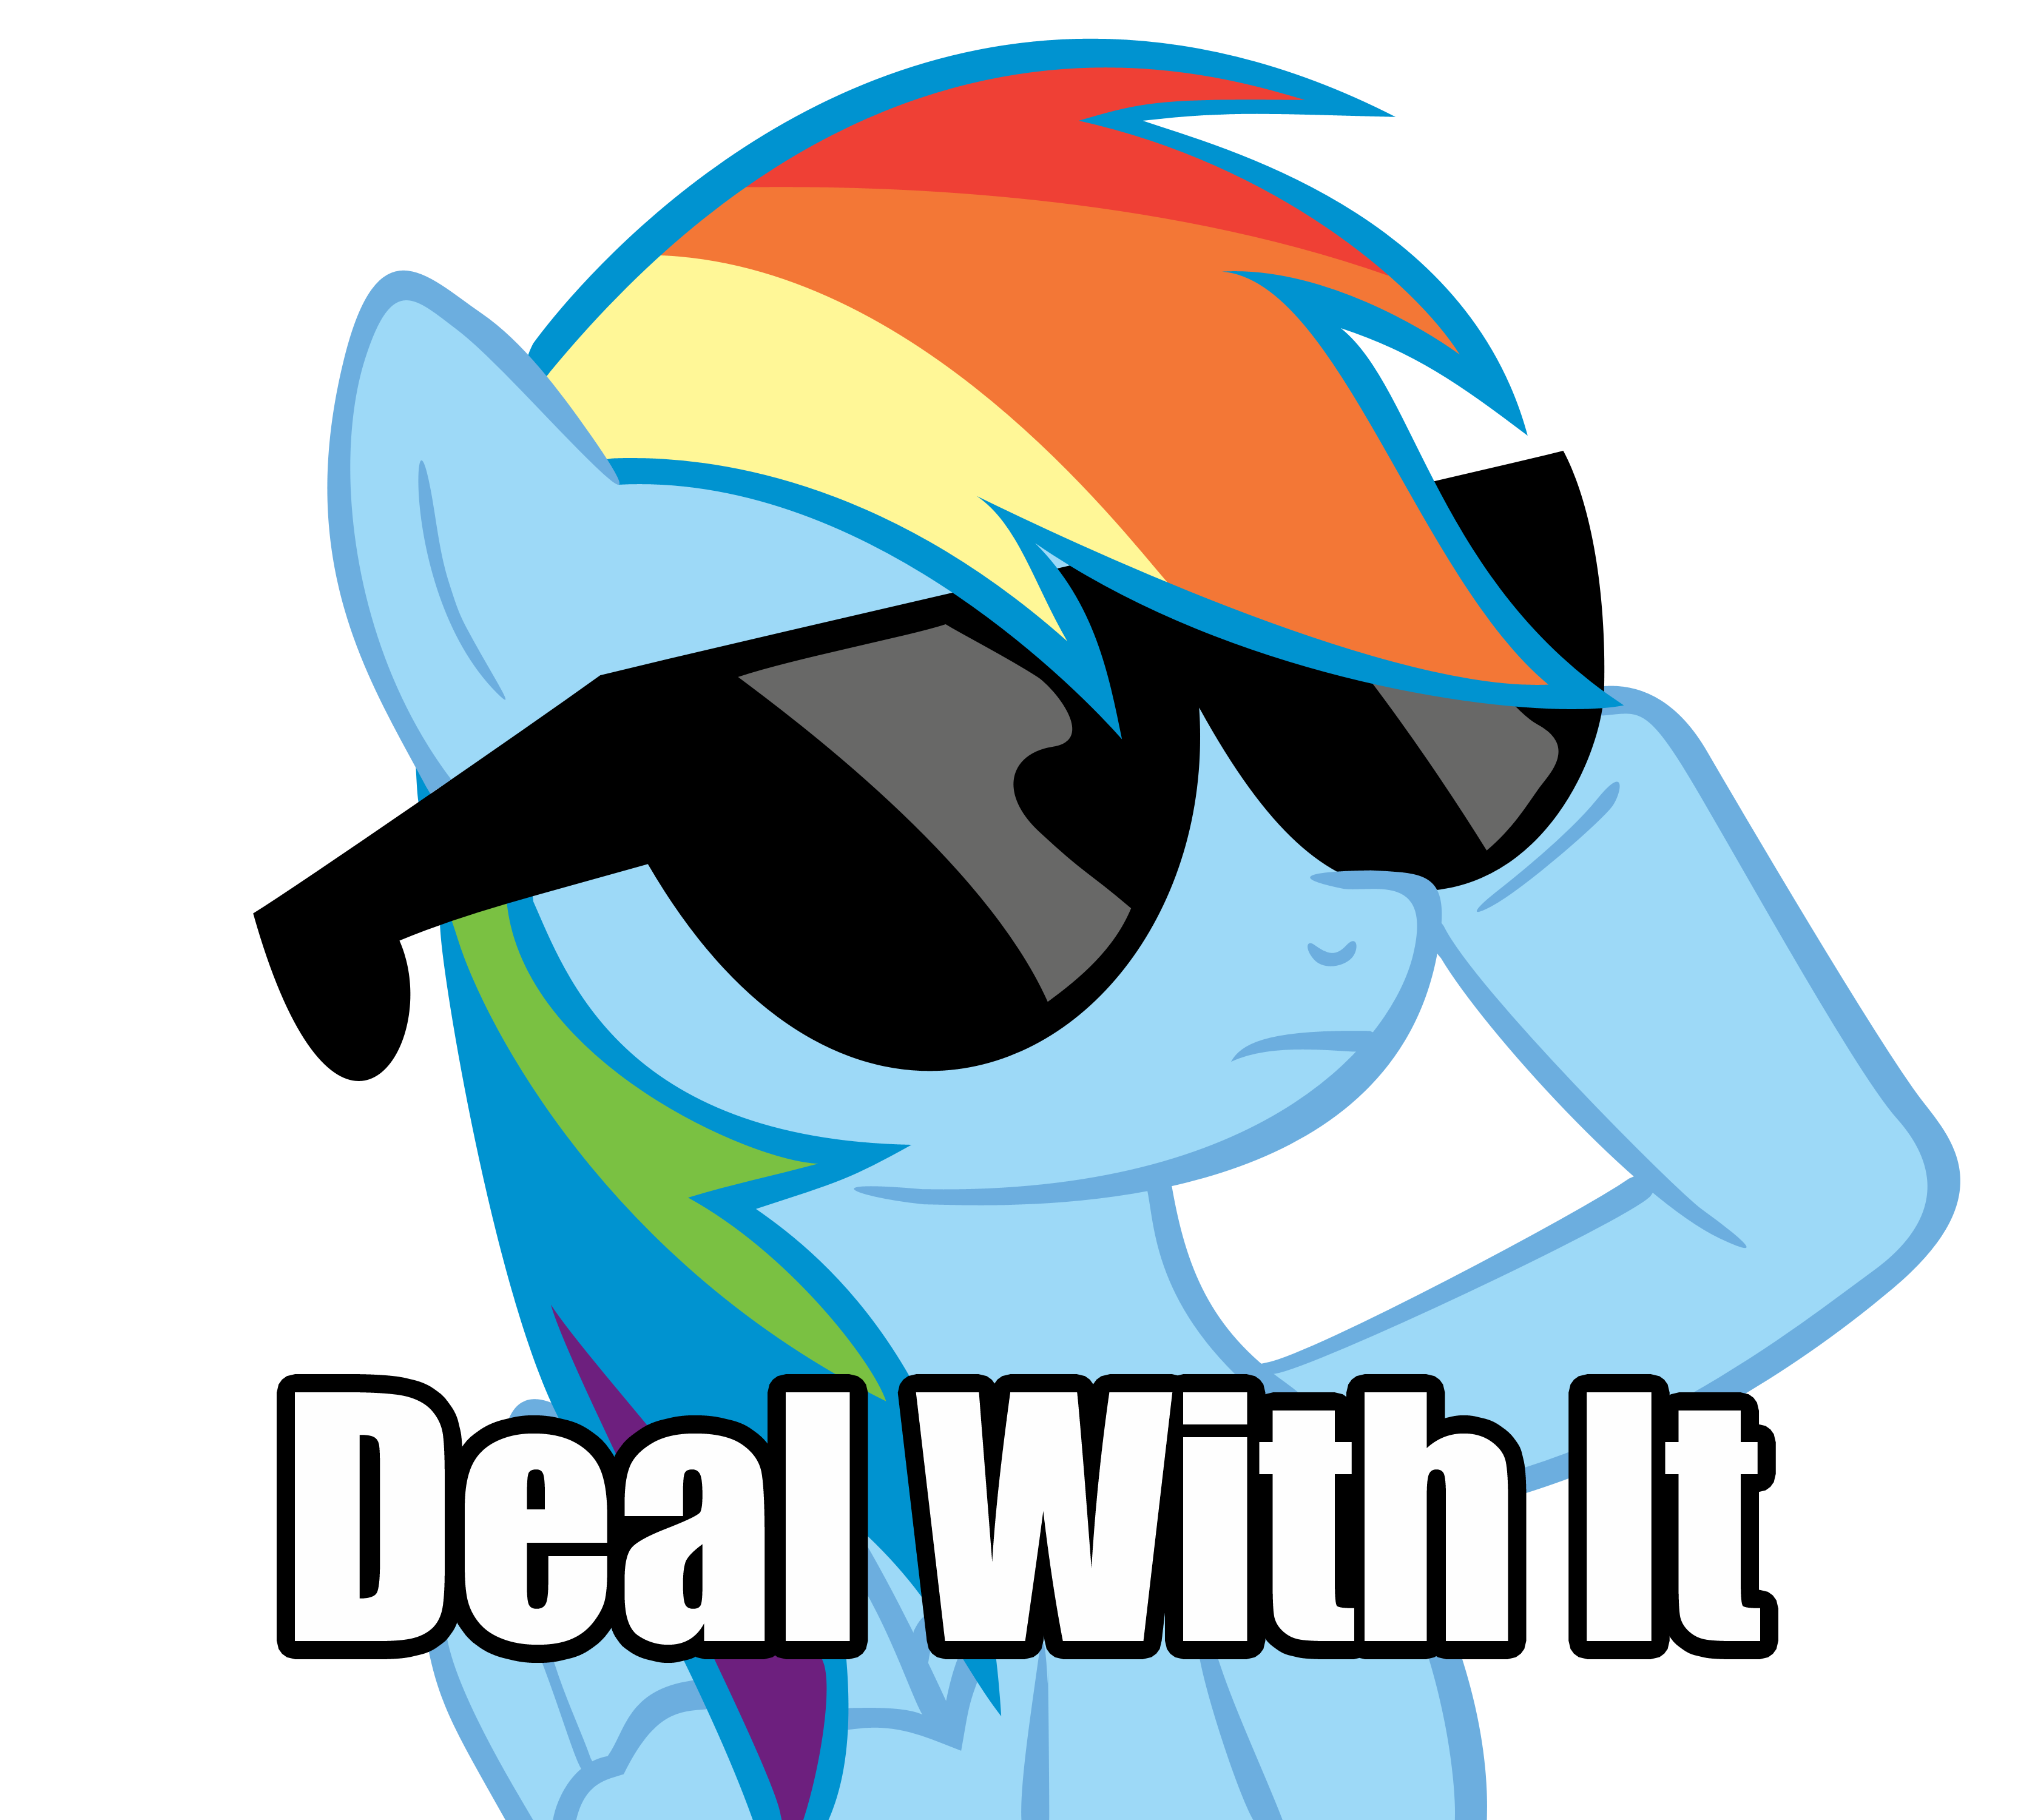 [Bild: deal_with_it___rainbow_style__by_j_brony-d4cwgad.png]